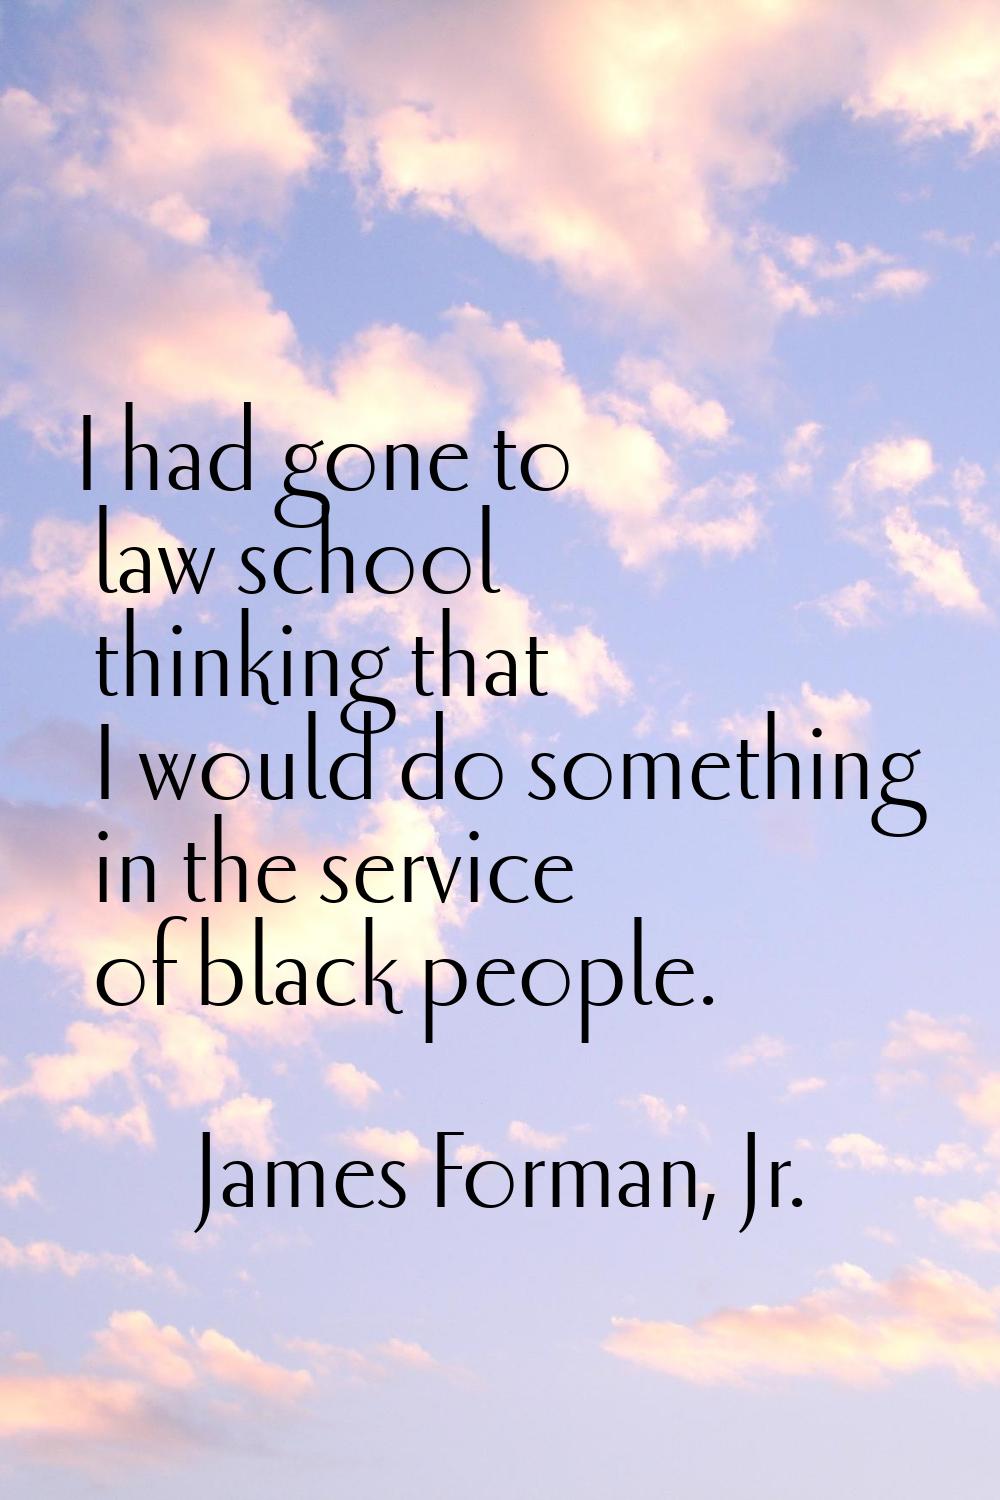 I had gone to law school thinking that I would do something in the service of black people.